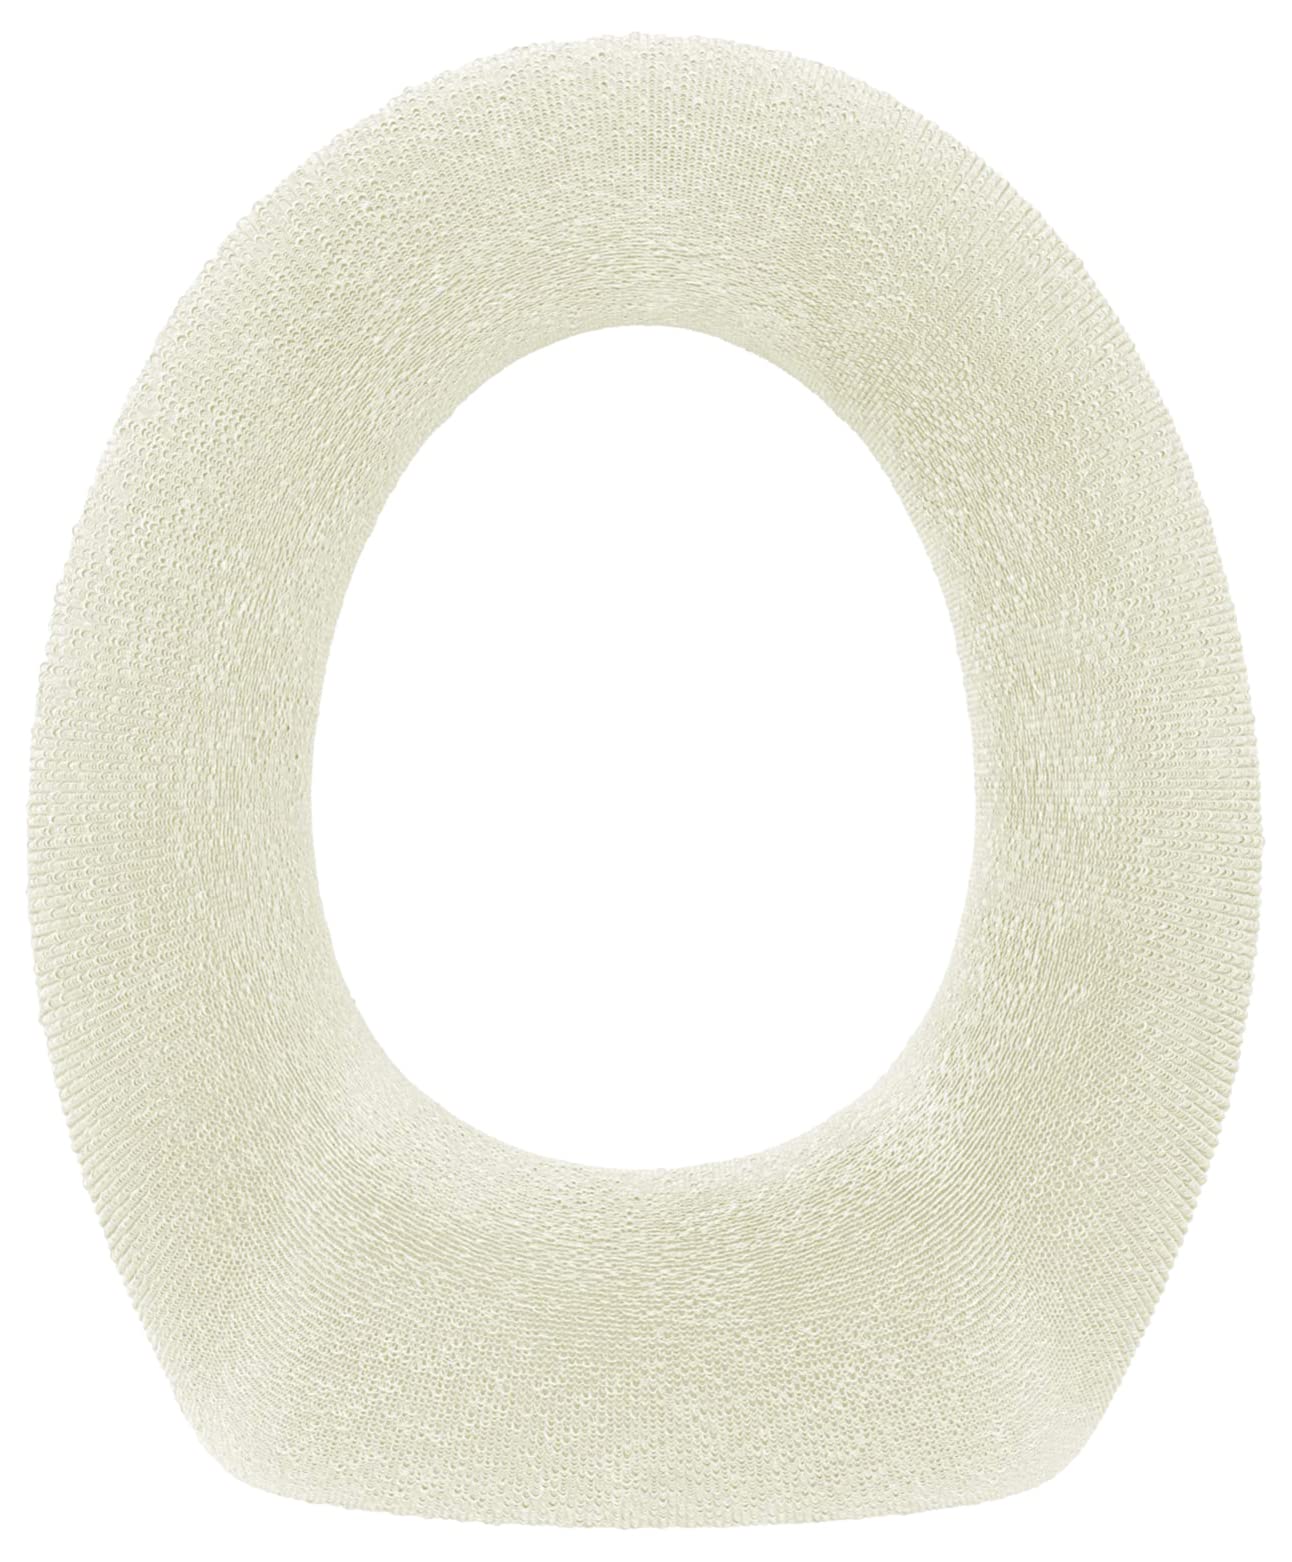 Elastic Cushioned Toilet Seat Cover Universal Fit White 